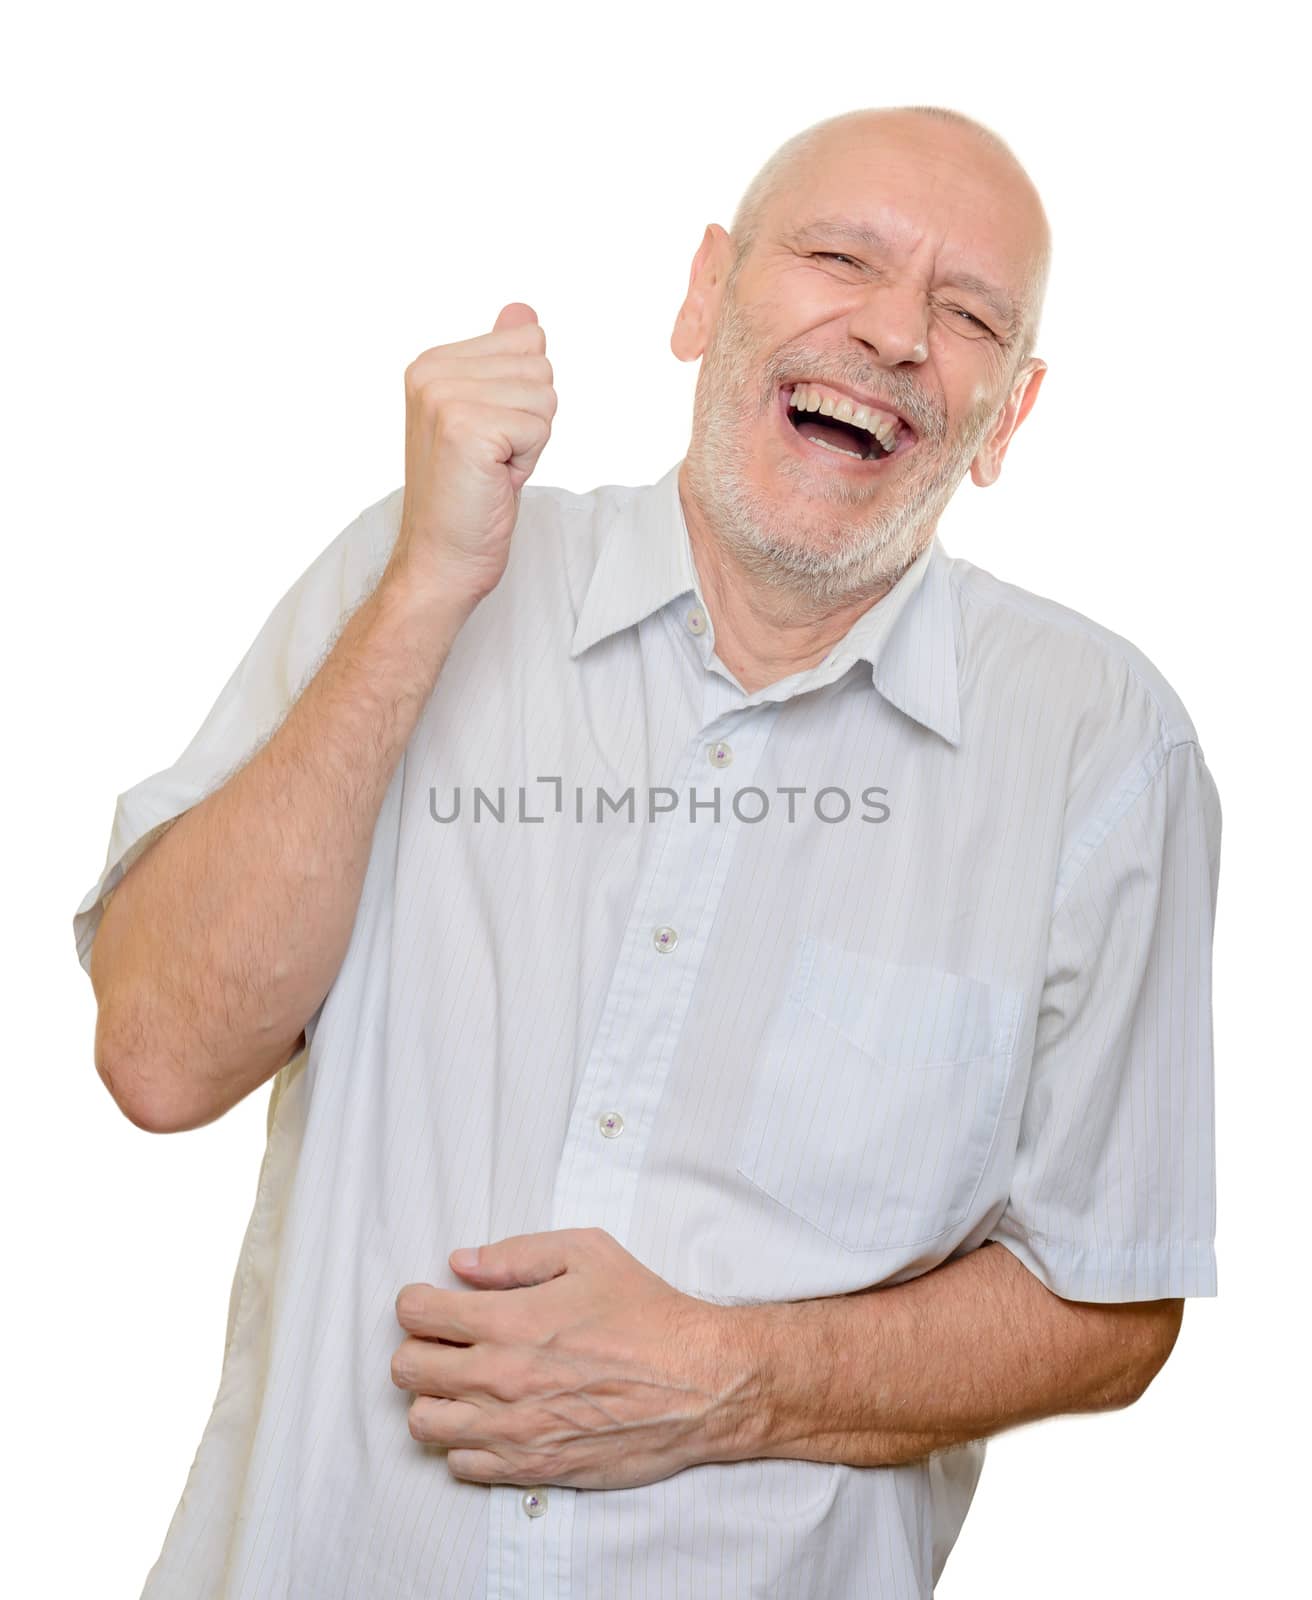 Man with light cotton shirt laughing out loud, isolated on white background